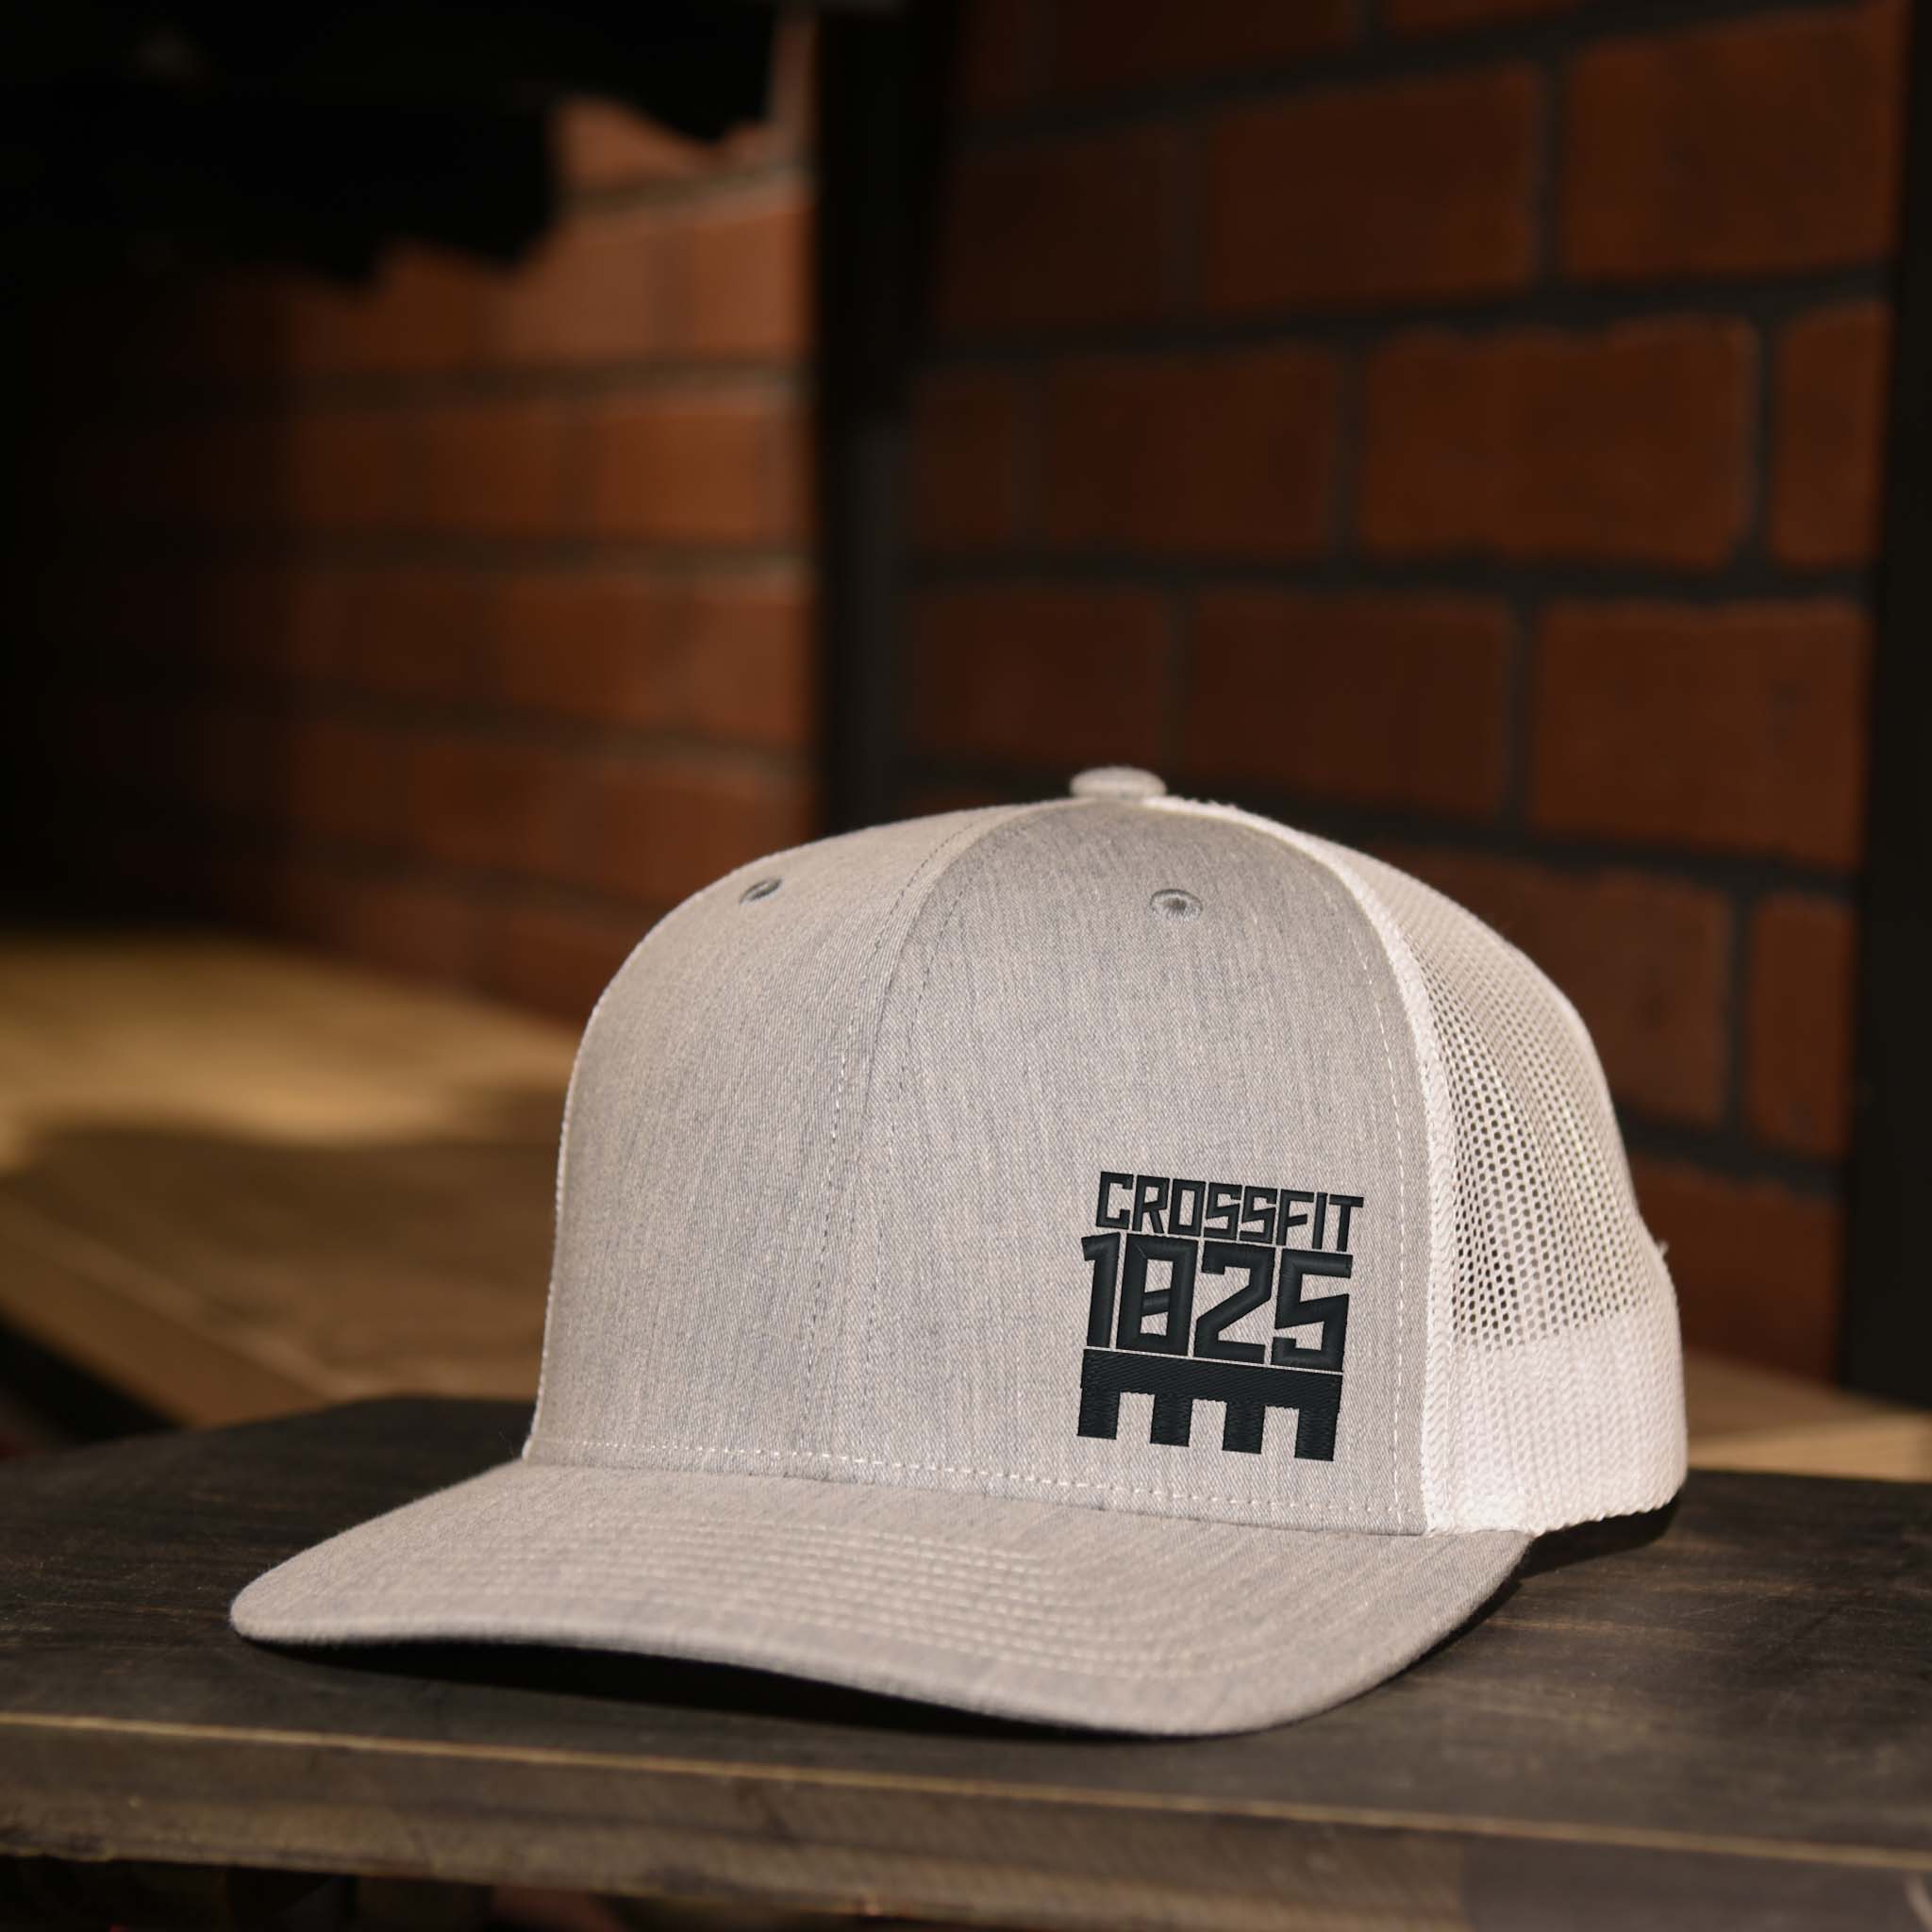 Heather Gray and White Trucker Hat with Crossfit 1825 Logo embroidered in black